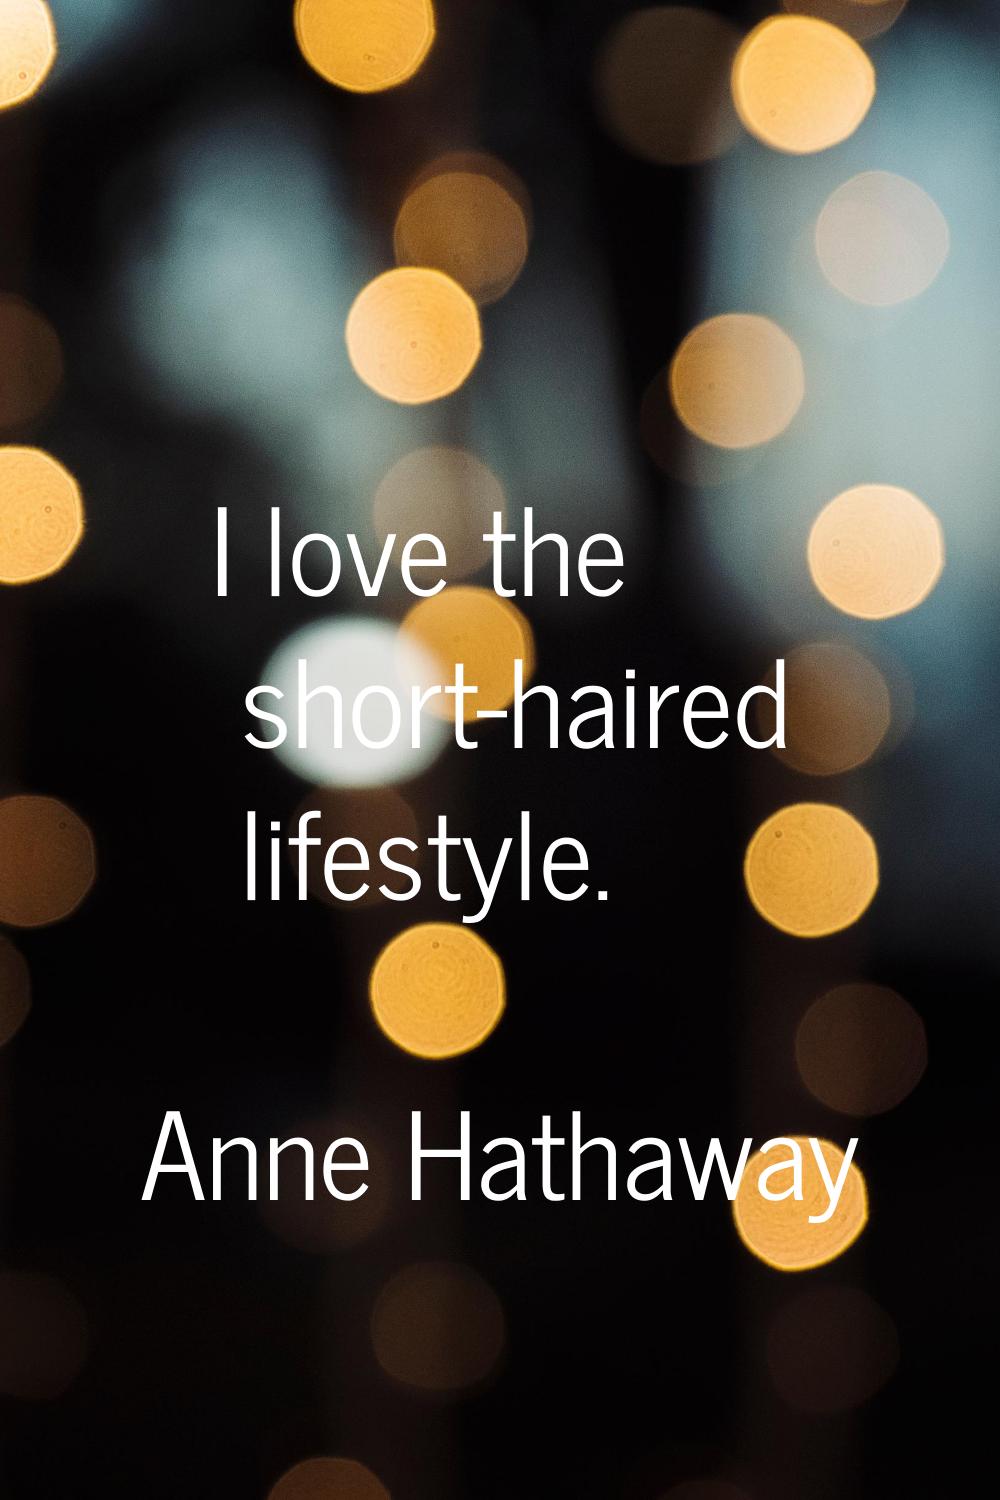 I love the short-haired lifestyle.